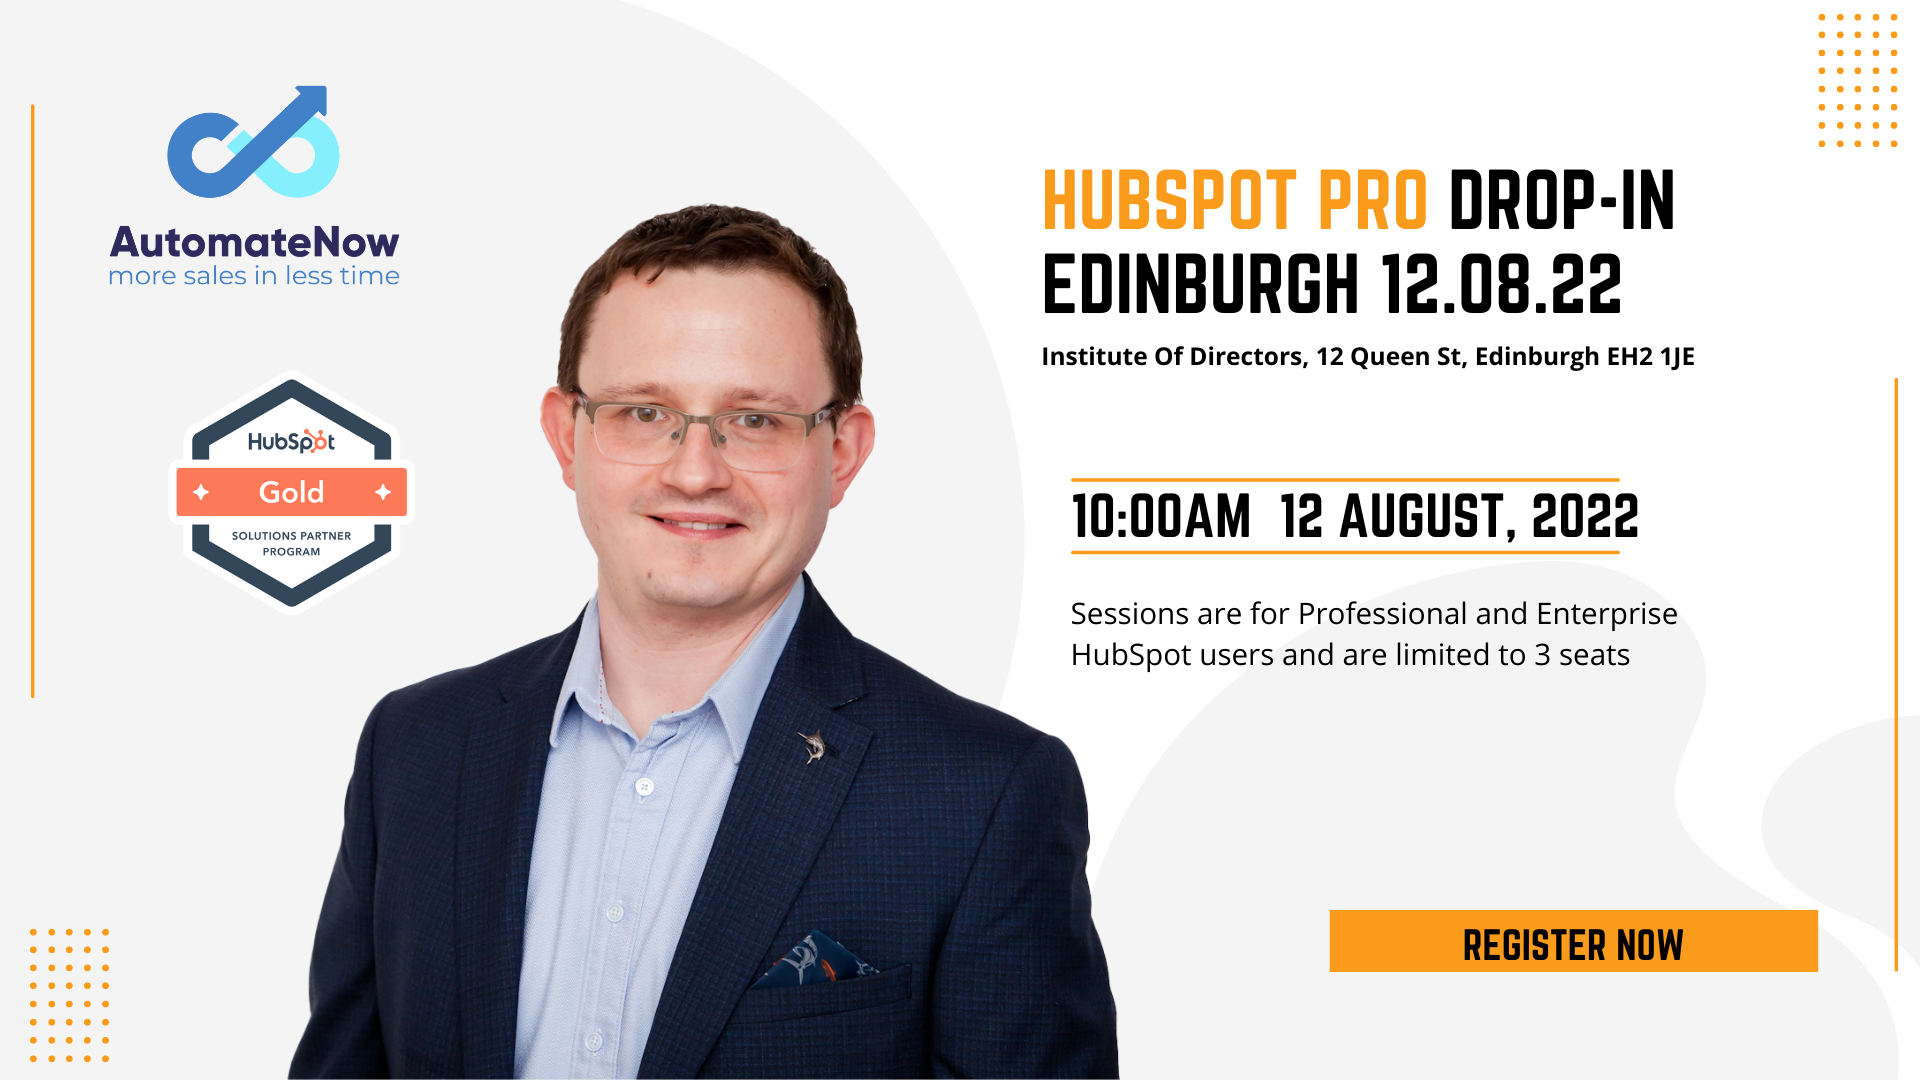 Sessions are for Professional and Enterprise HubSpot users in Edinburgh at 12.08.22